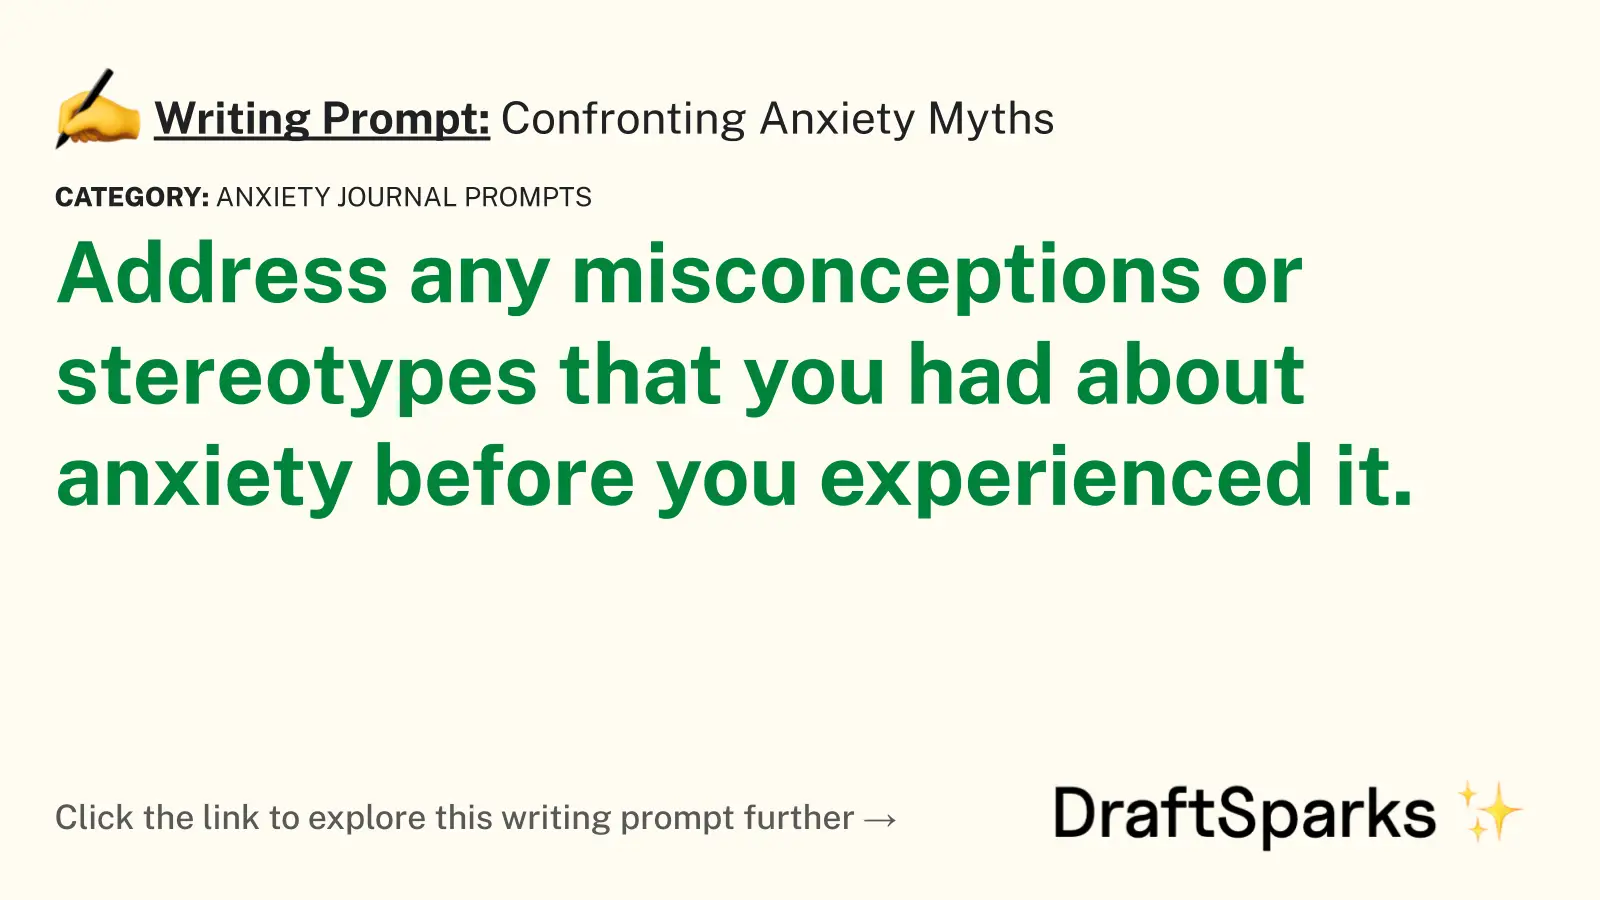 Confronting Anxiety Myths